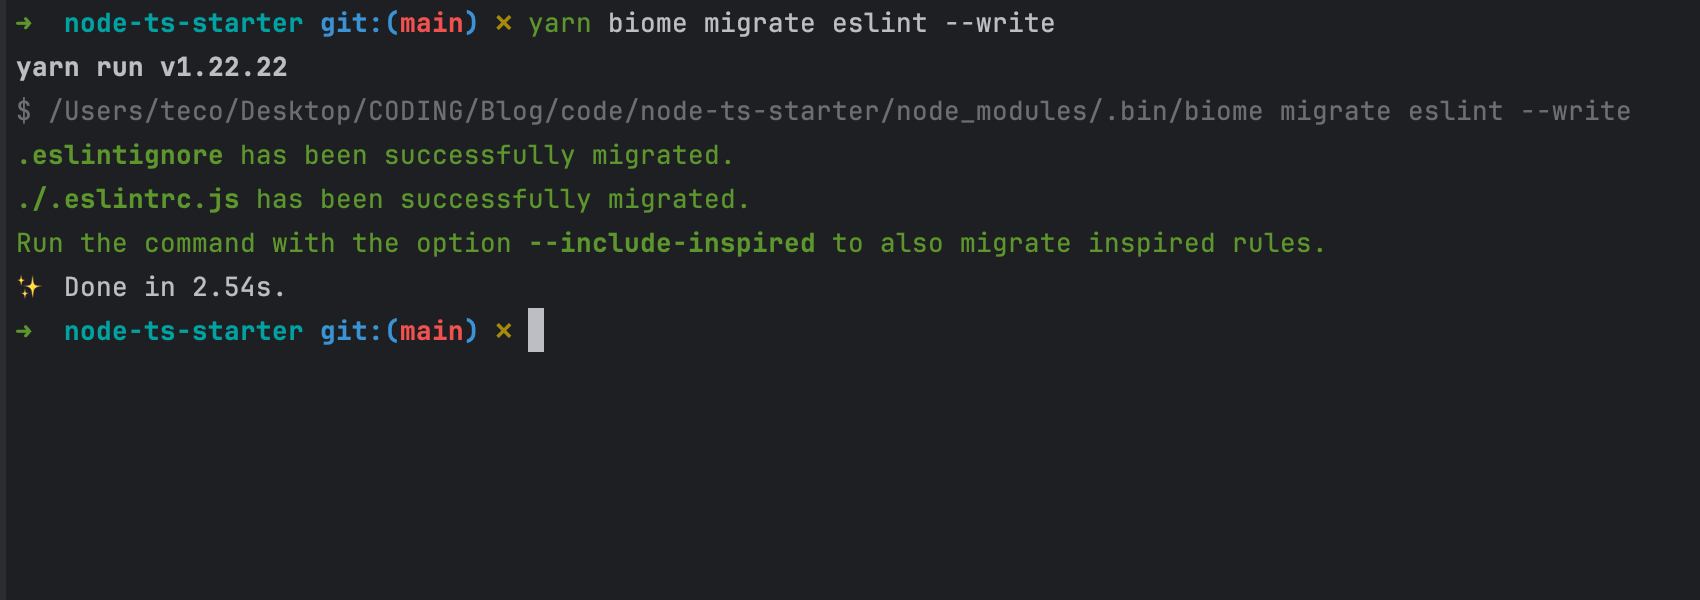 Migrate the ESLint configuration files to Biome.